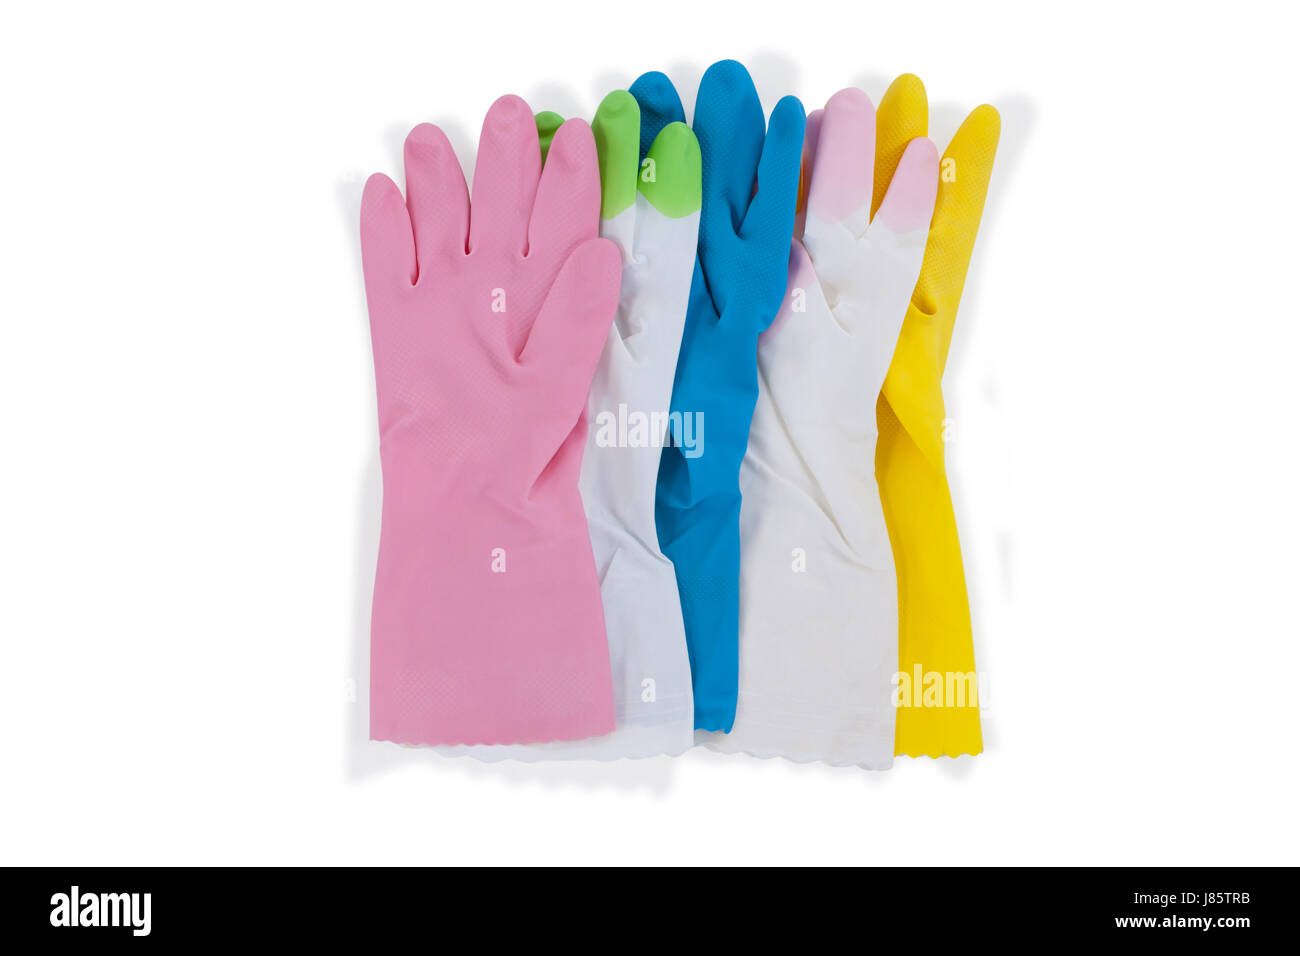 Various colorful rubber gloves on white background Stock Photo